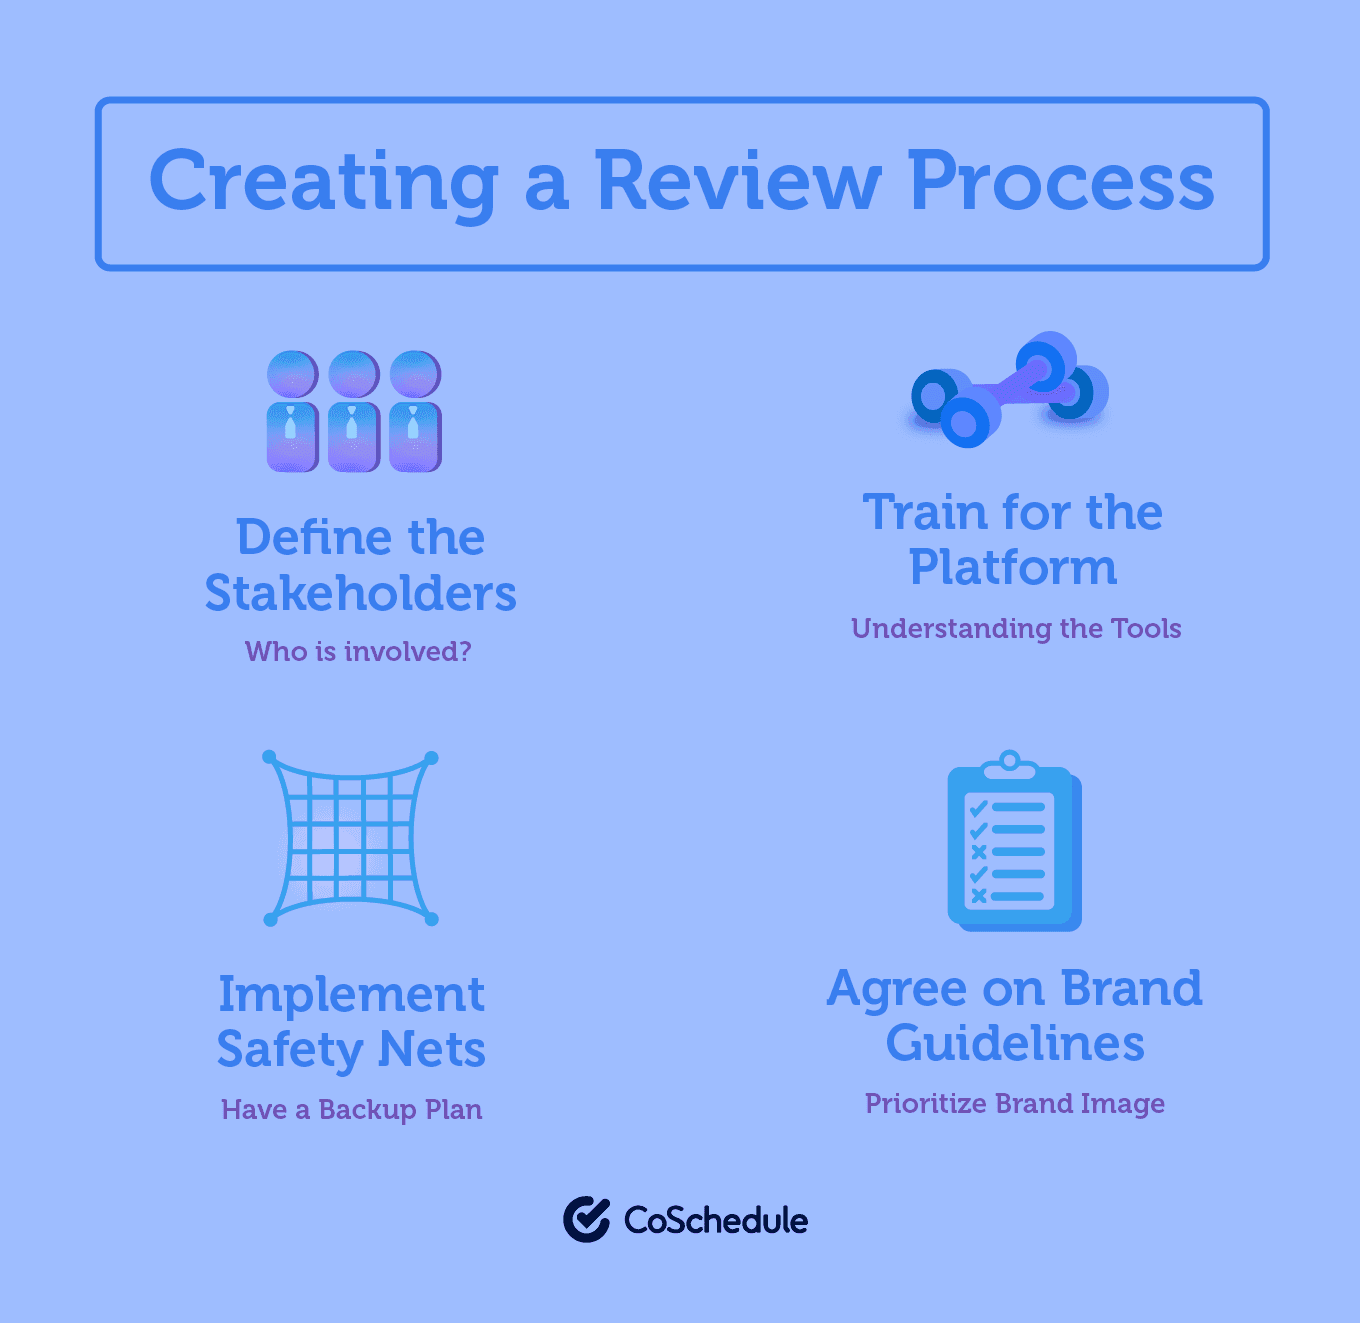 Content production review process - define the stake holders - Train for the platform - Implement safety nets - Agree on brand guidelines